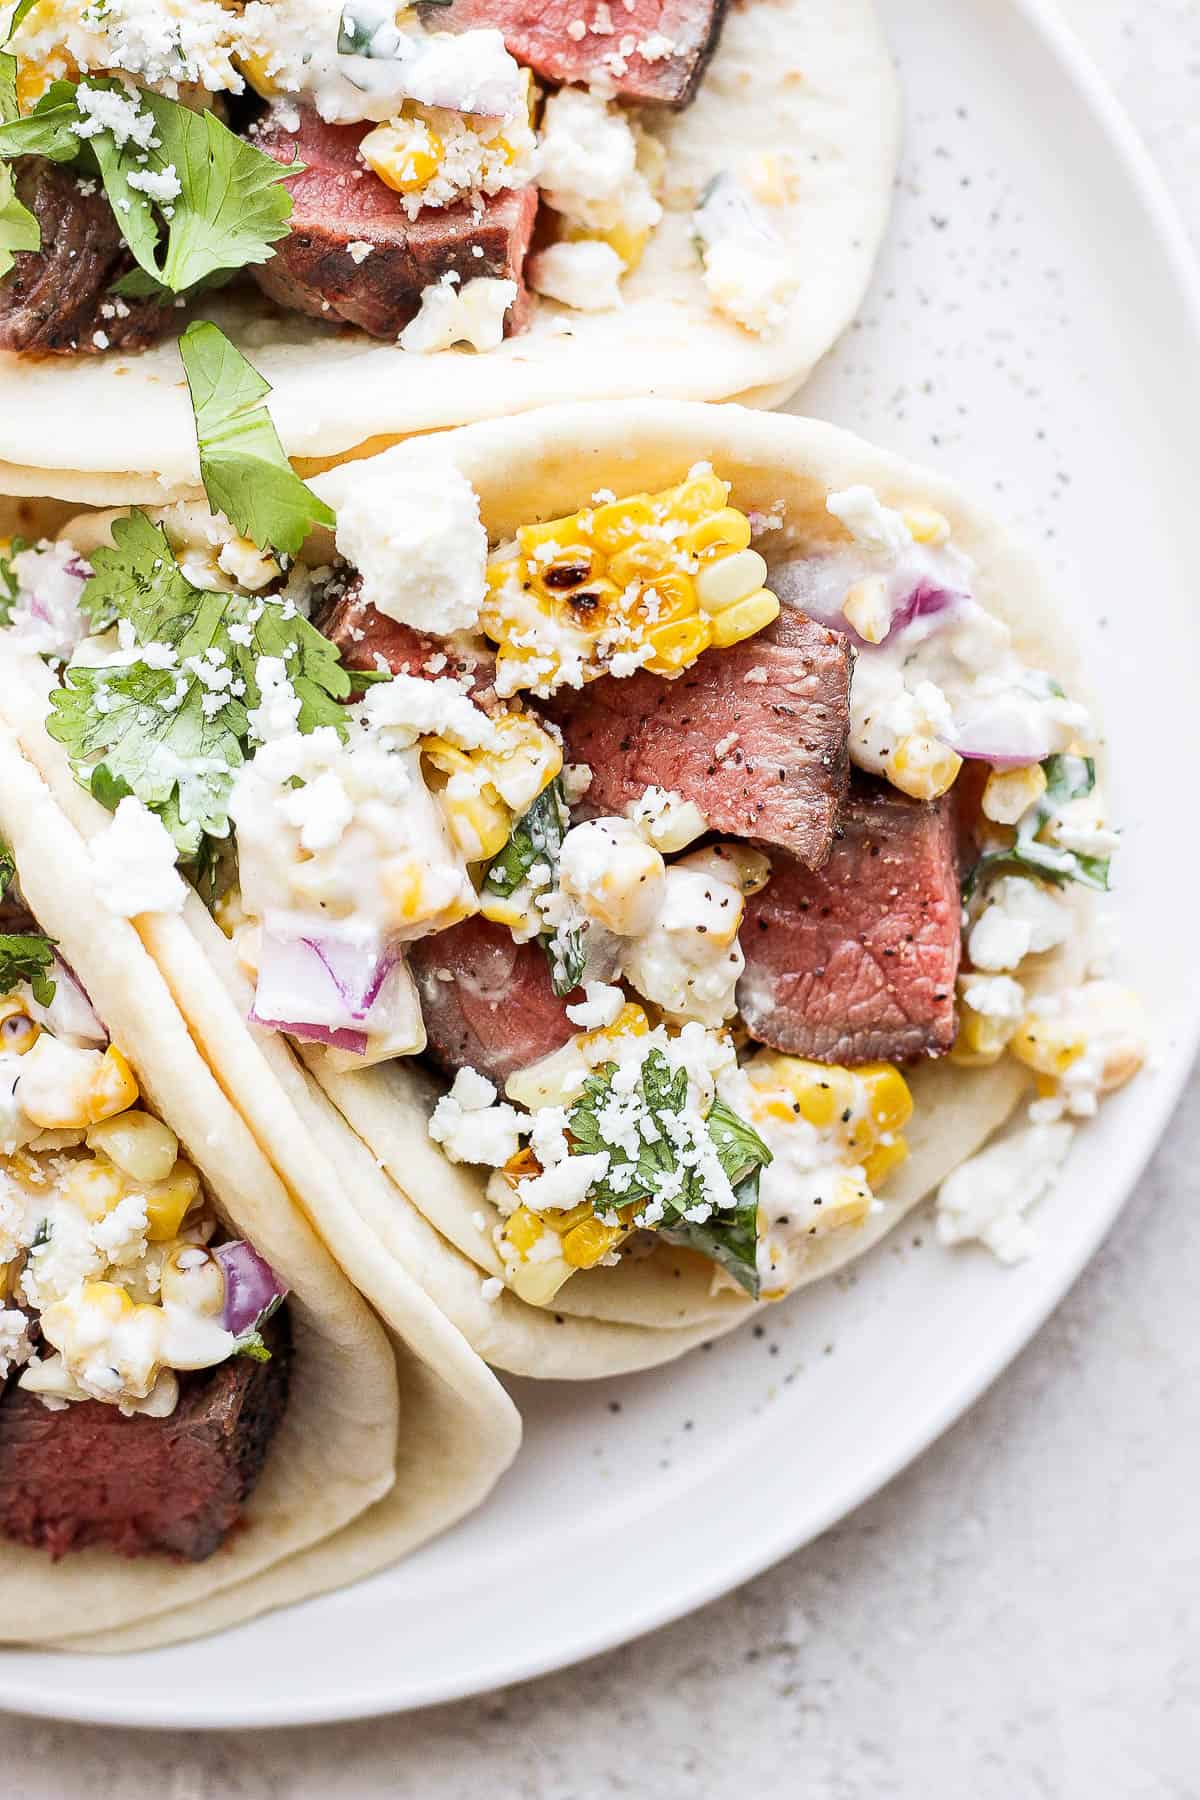 Steak tacos on a plate.